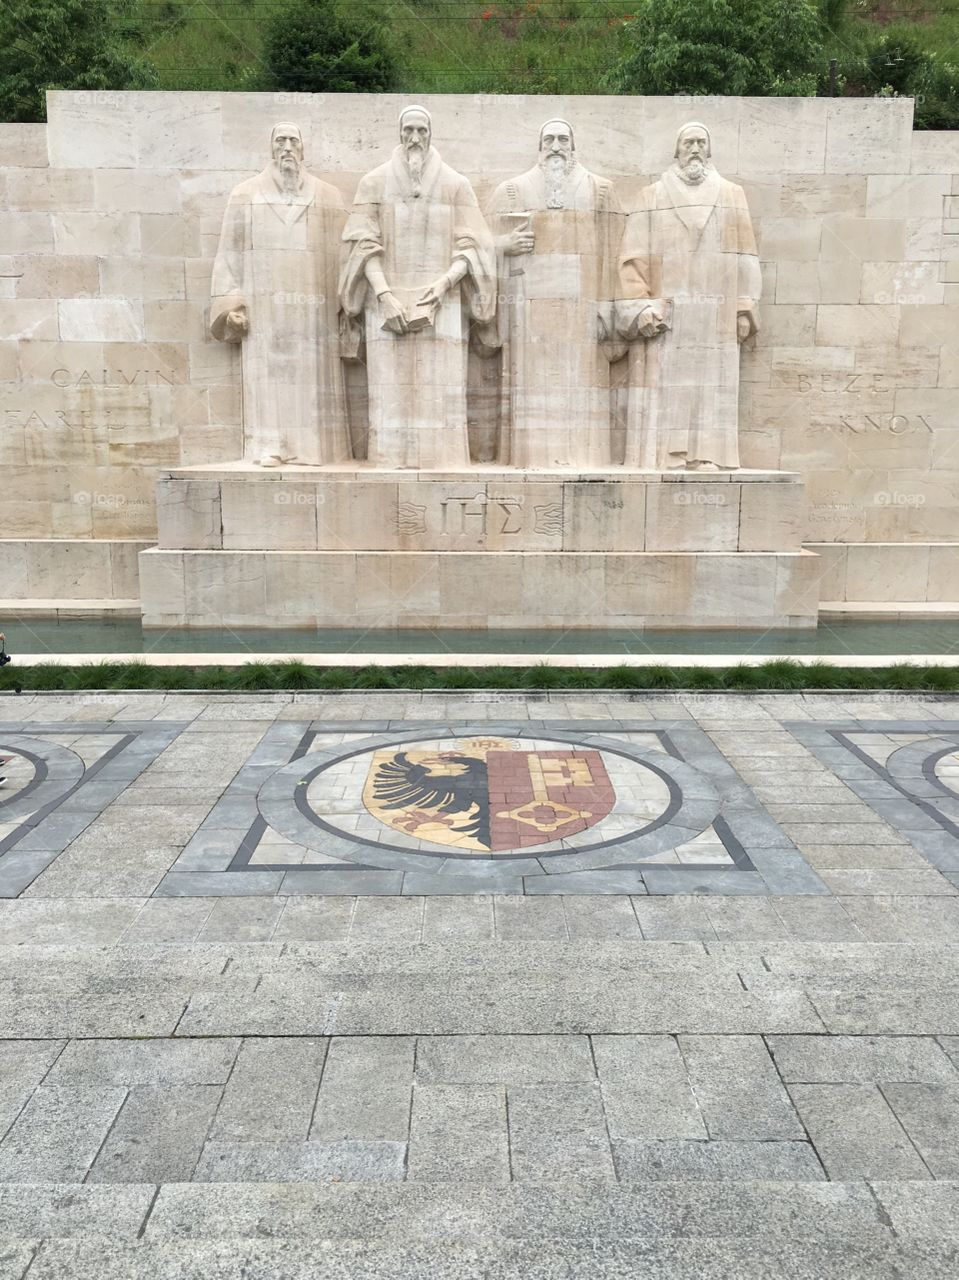 The Reformation Wall in the Parc de Bastions in Geneva, Switzerland. 